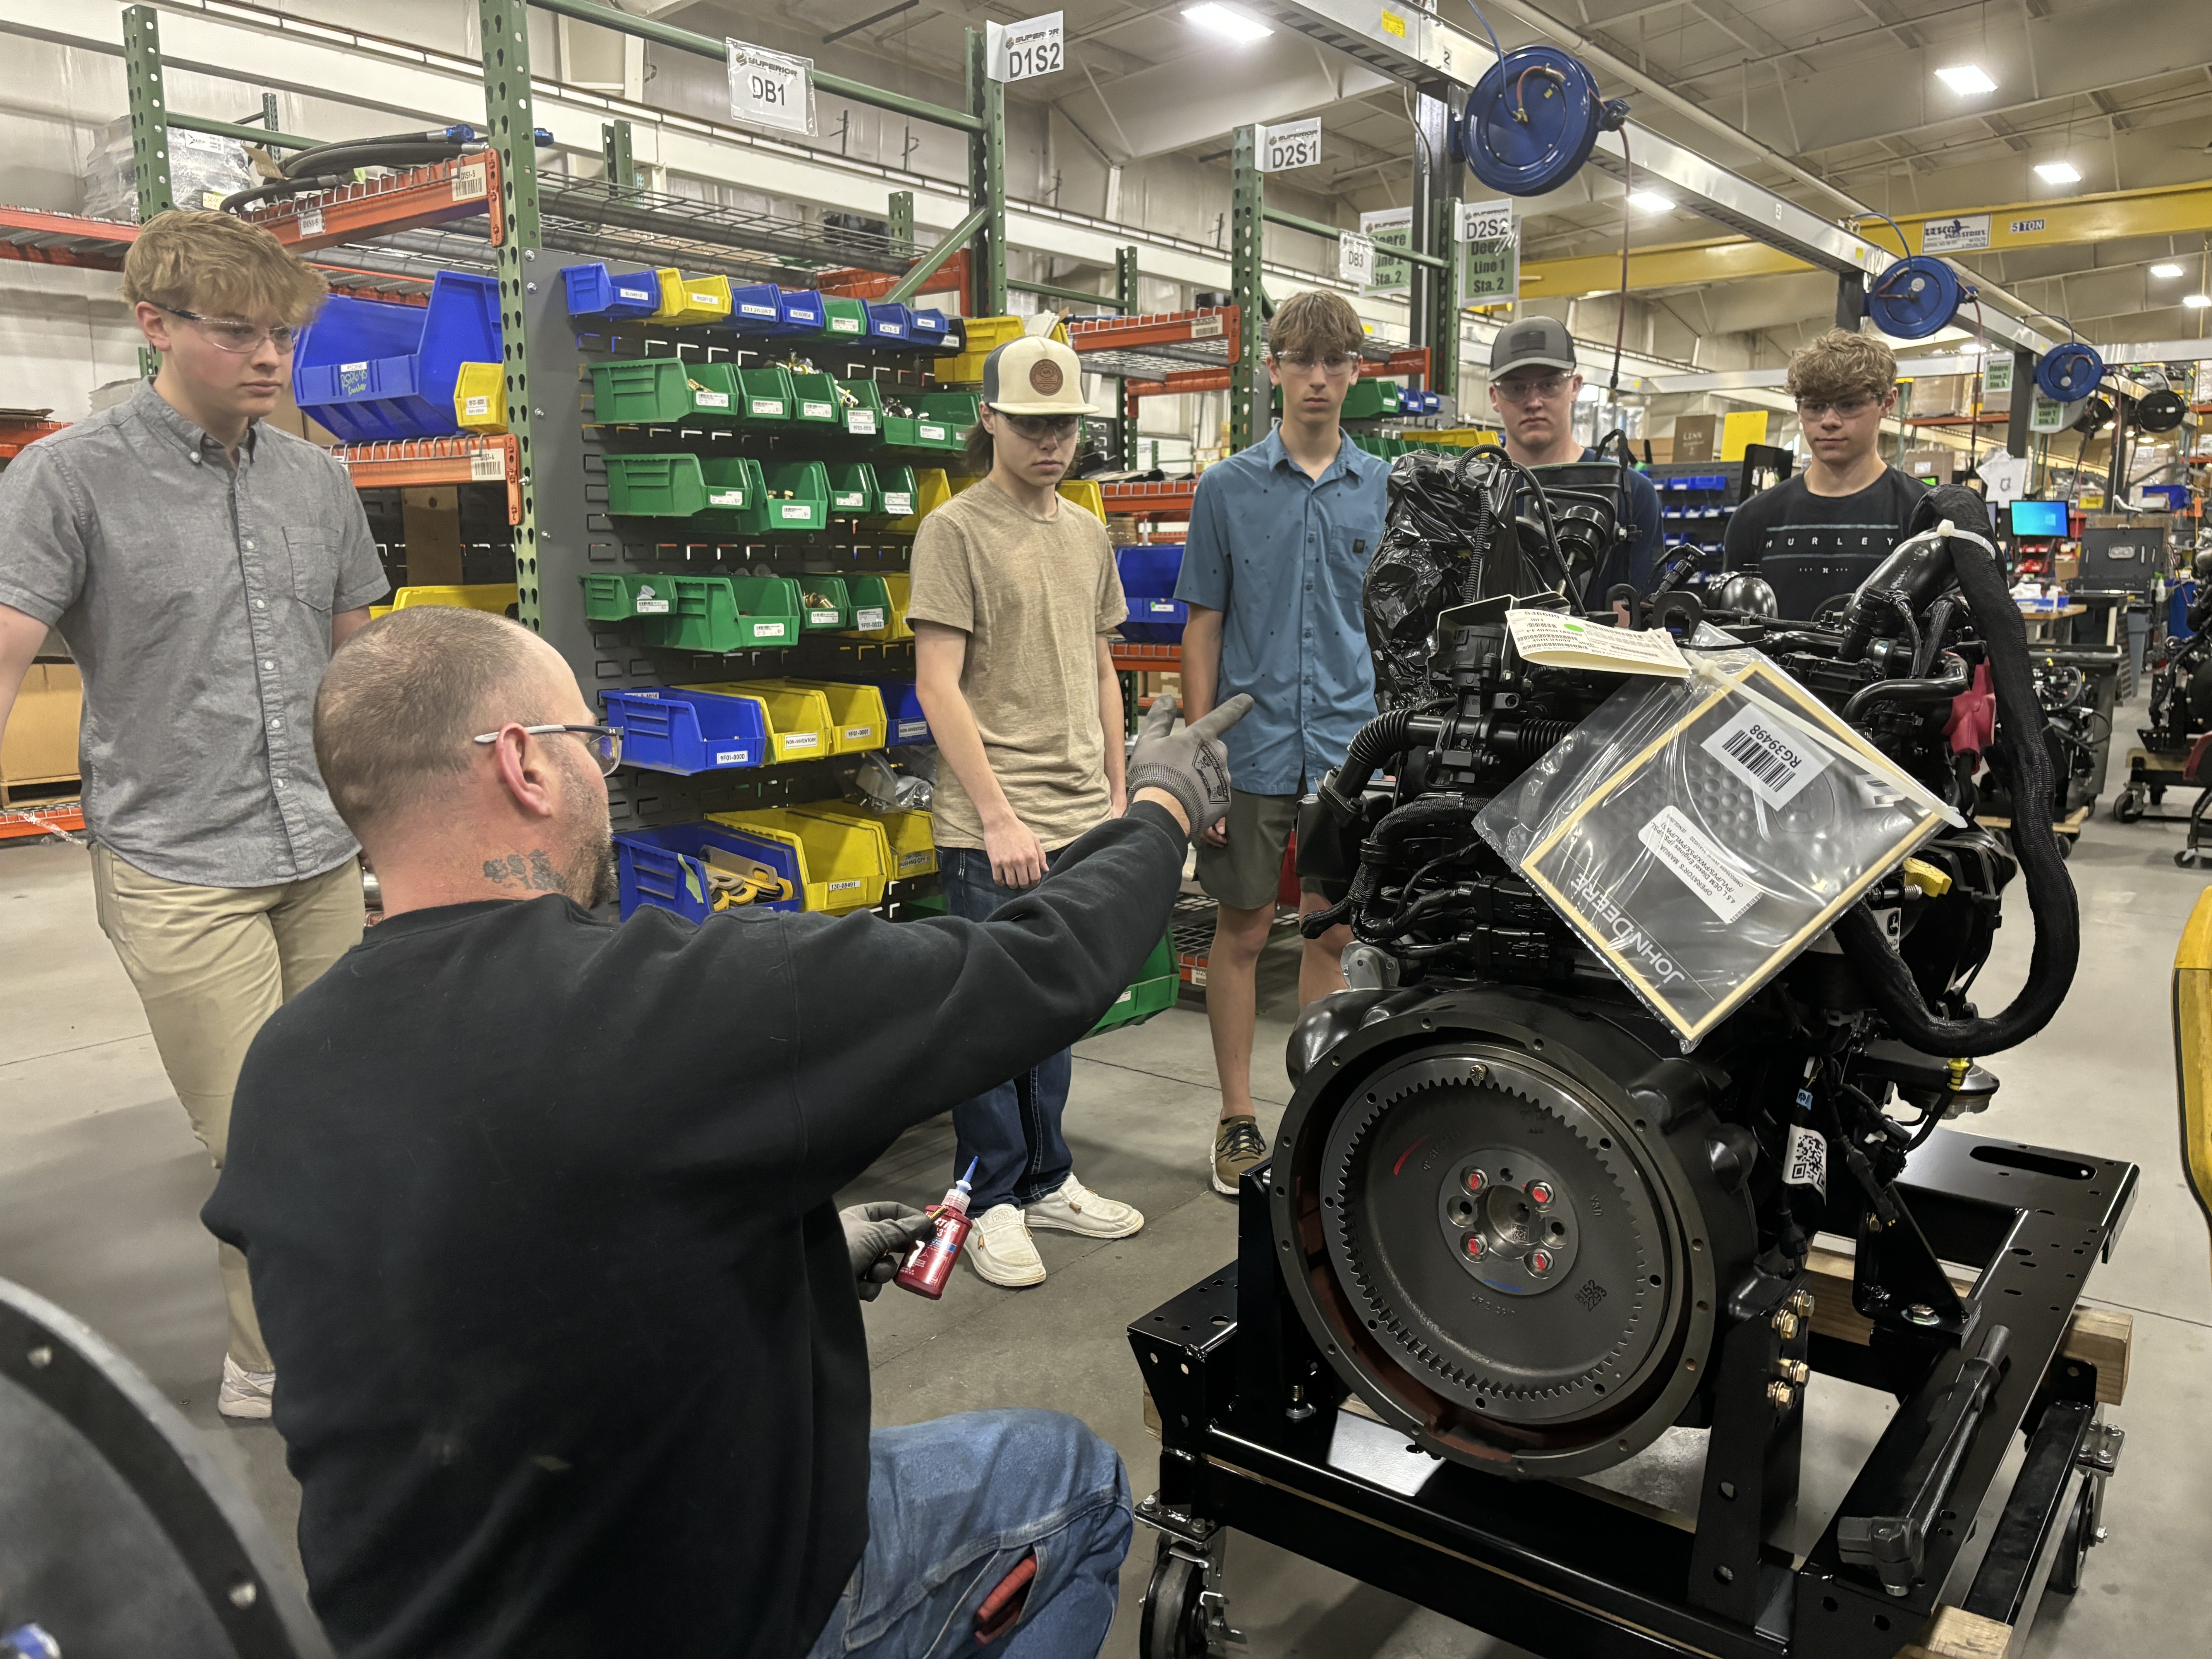 Students taking a company tour at a manufacturing business.